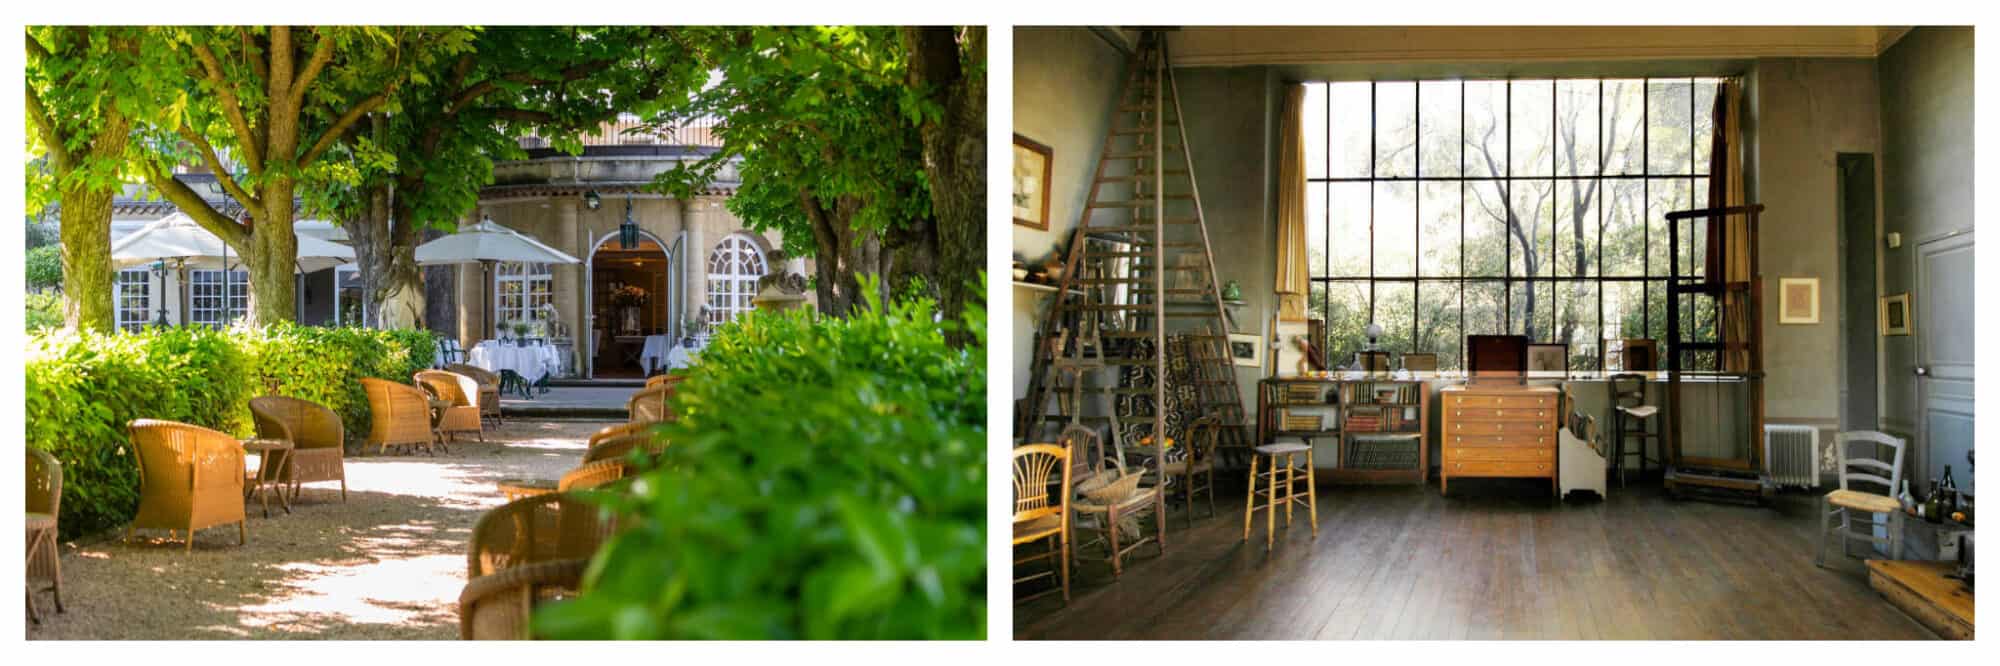 Left: Whicker chairs line a path outside the hotel Le Pigonnet in Aix-en-Provence on a sunny day, Right: Inside the Atelier de Cézanne in Aix-en-Provence